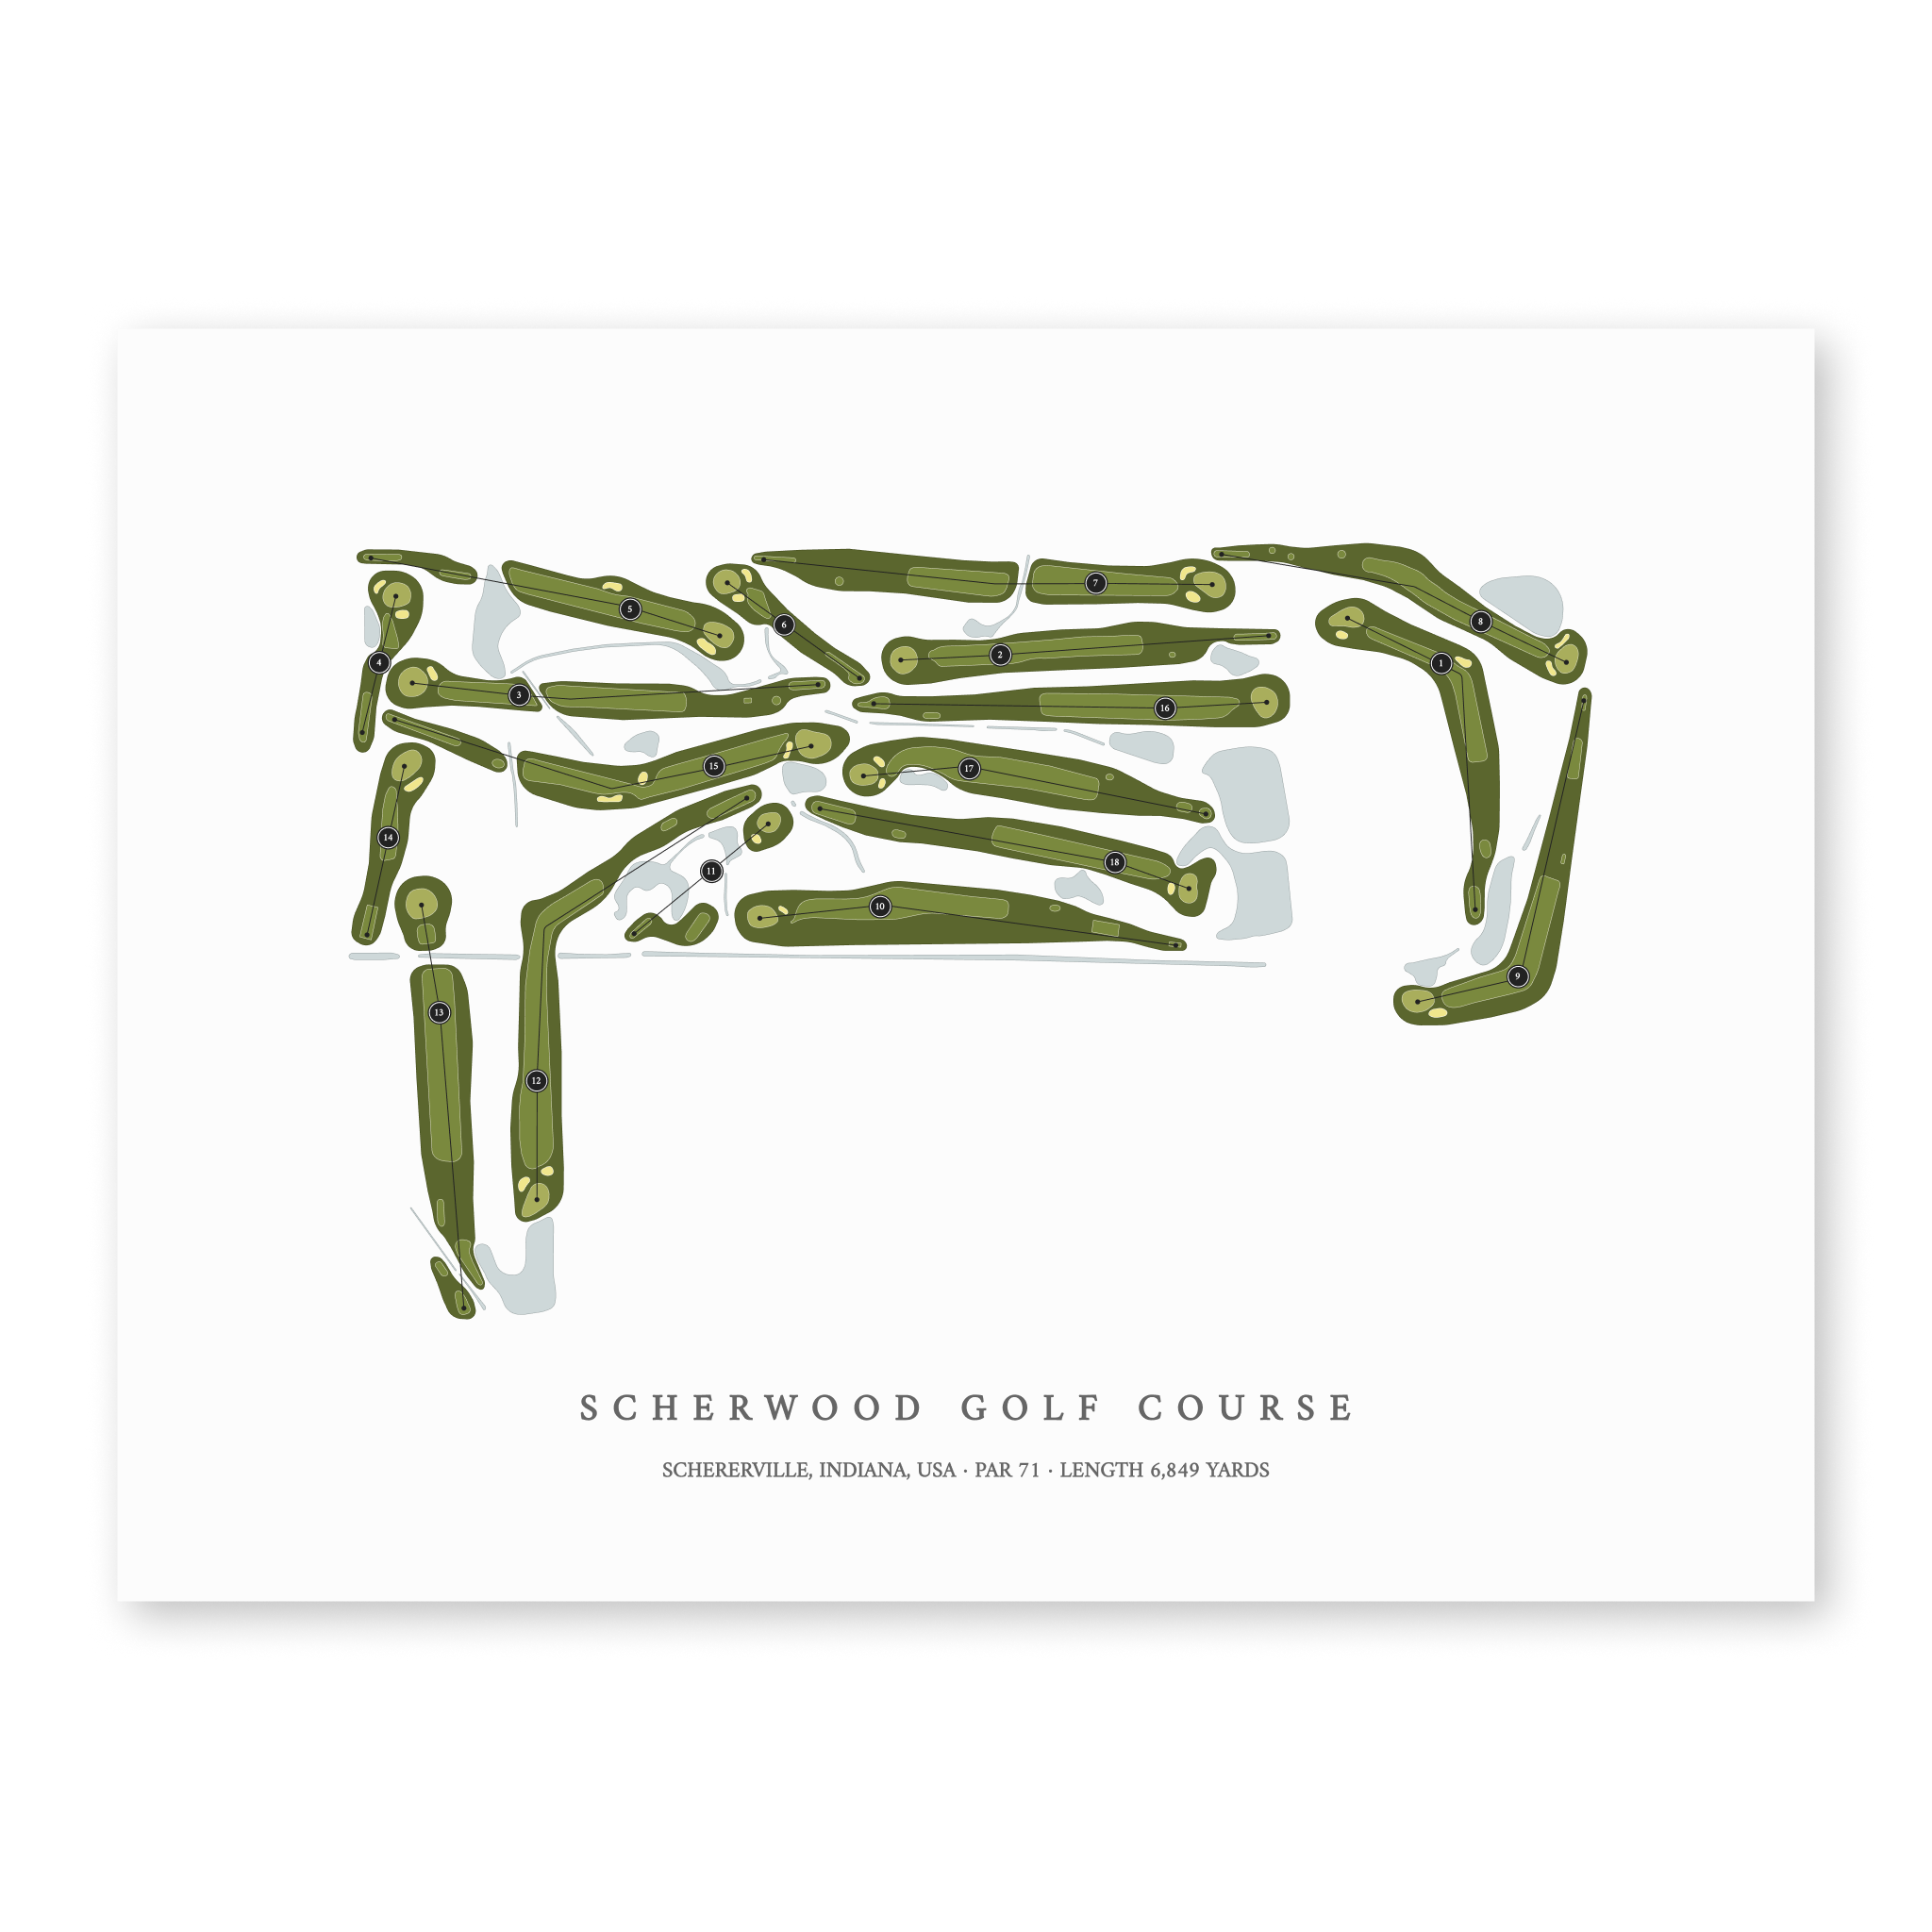 Scherwood Golf Course | Golf Course Map | Unframed With Hole Numbers #hole numbers_yes